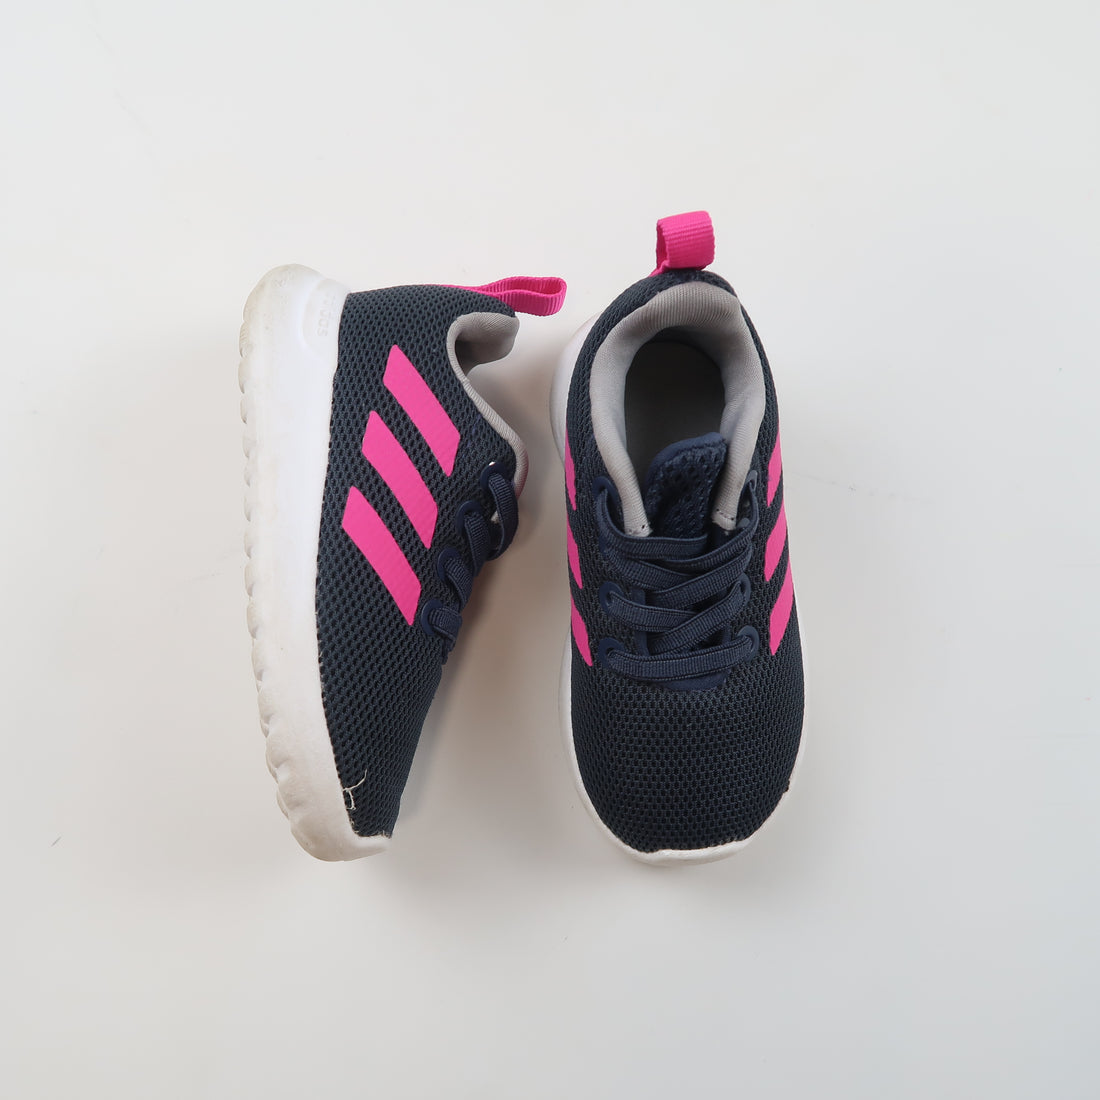 Adidas - Shoes (Shoes - 5)